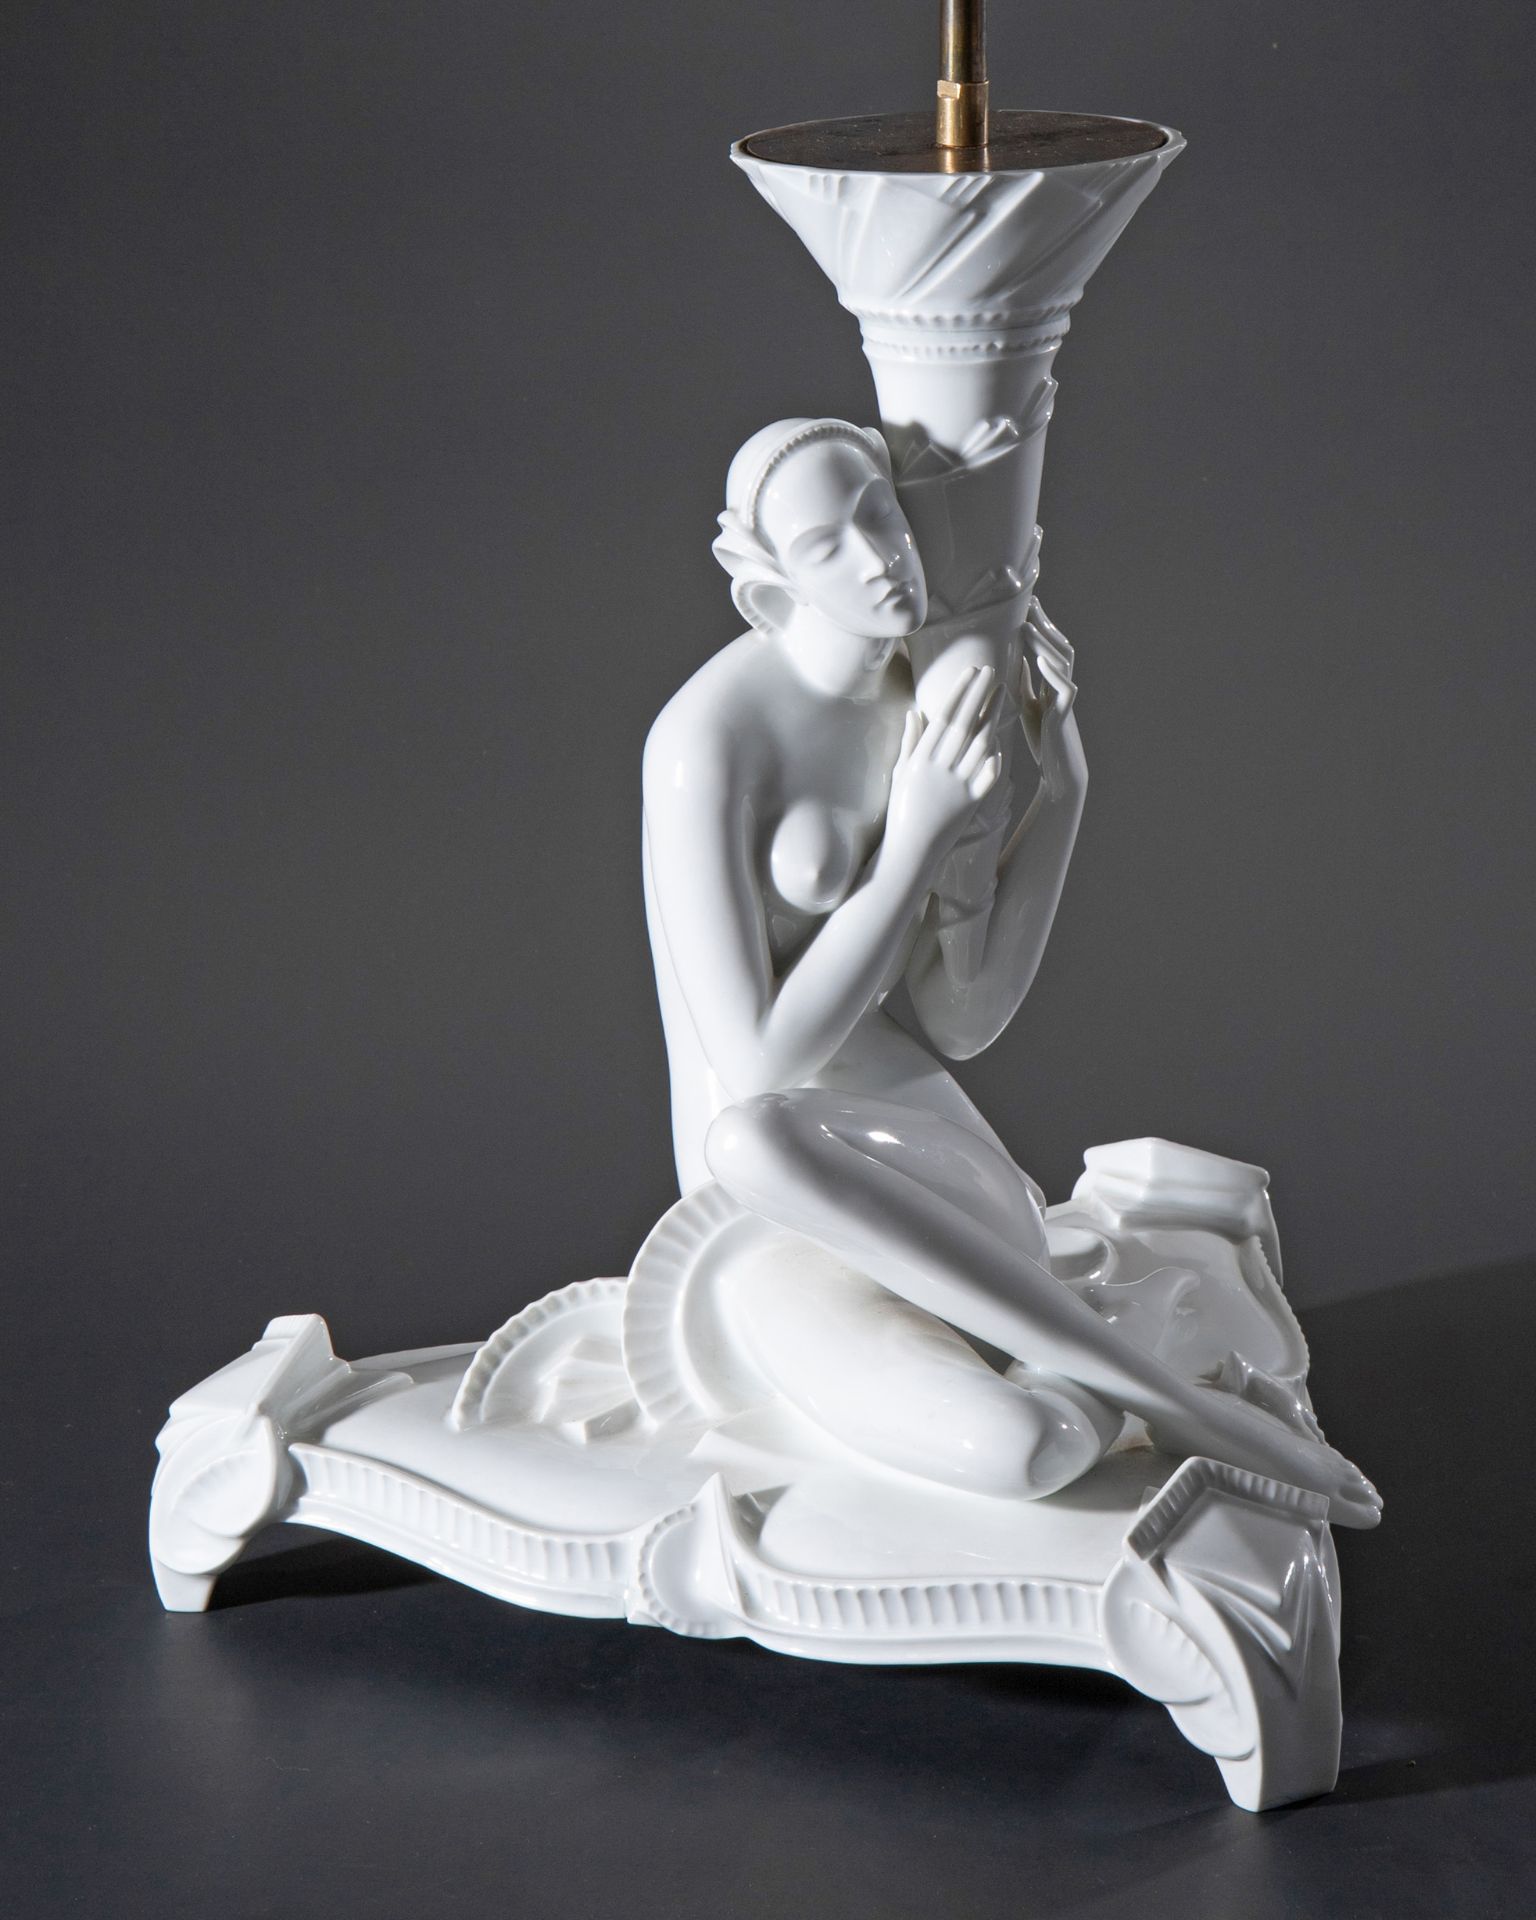 Gerhard Schliepstein, Rosenthal, Table lamp with a seated woman